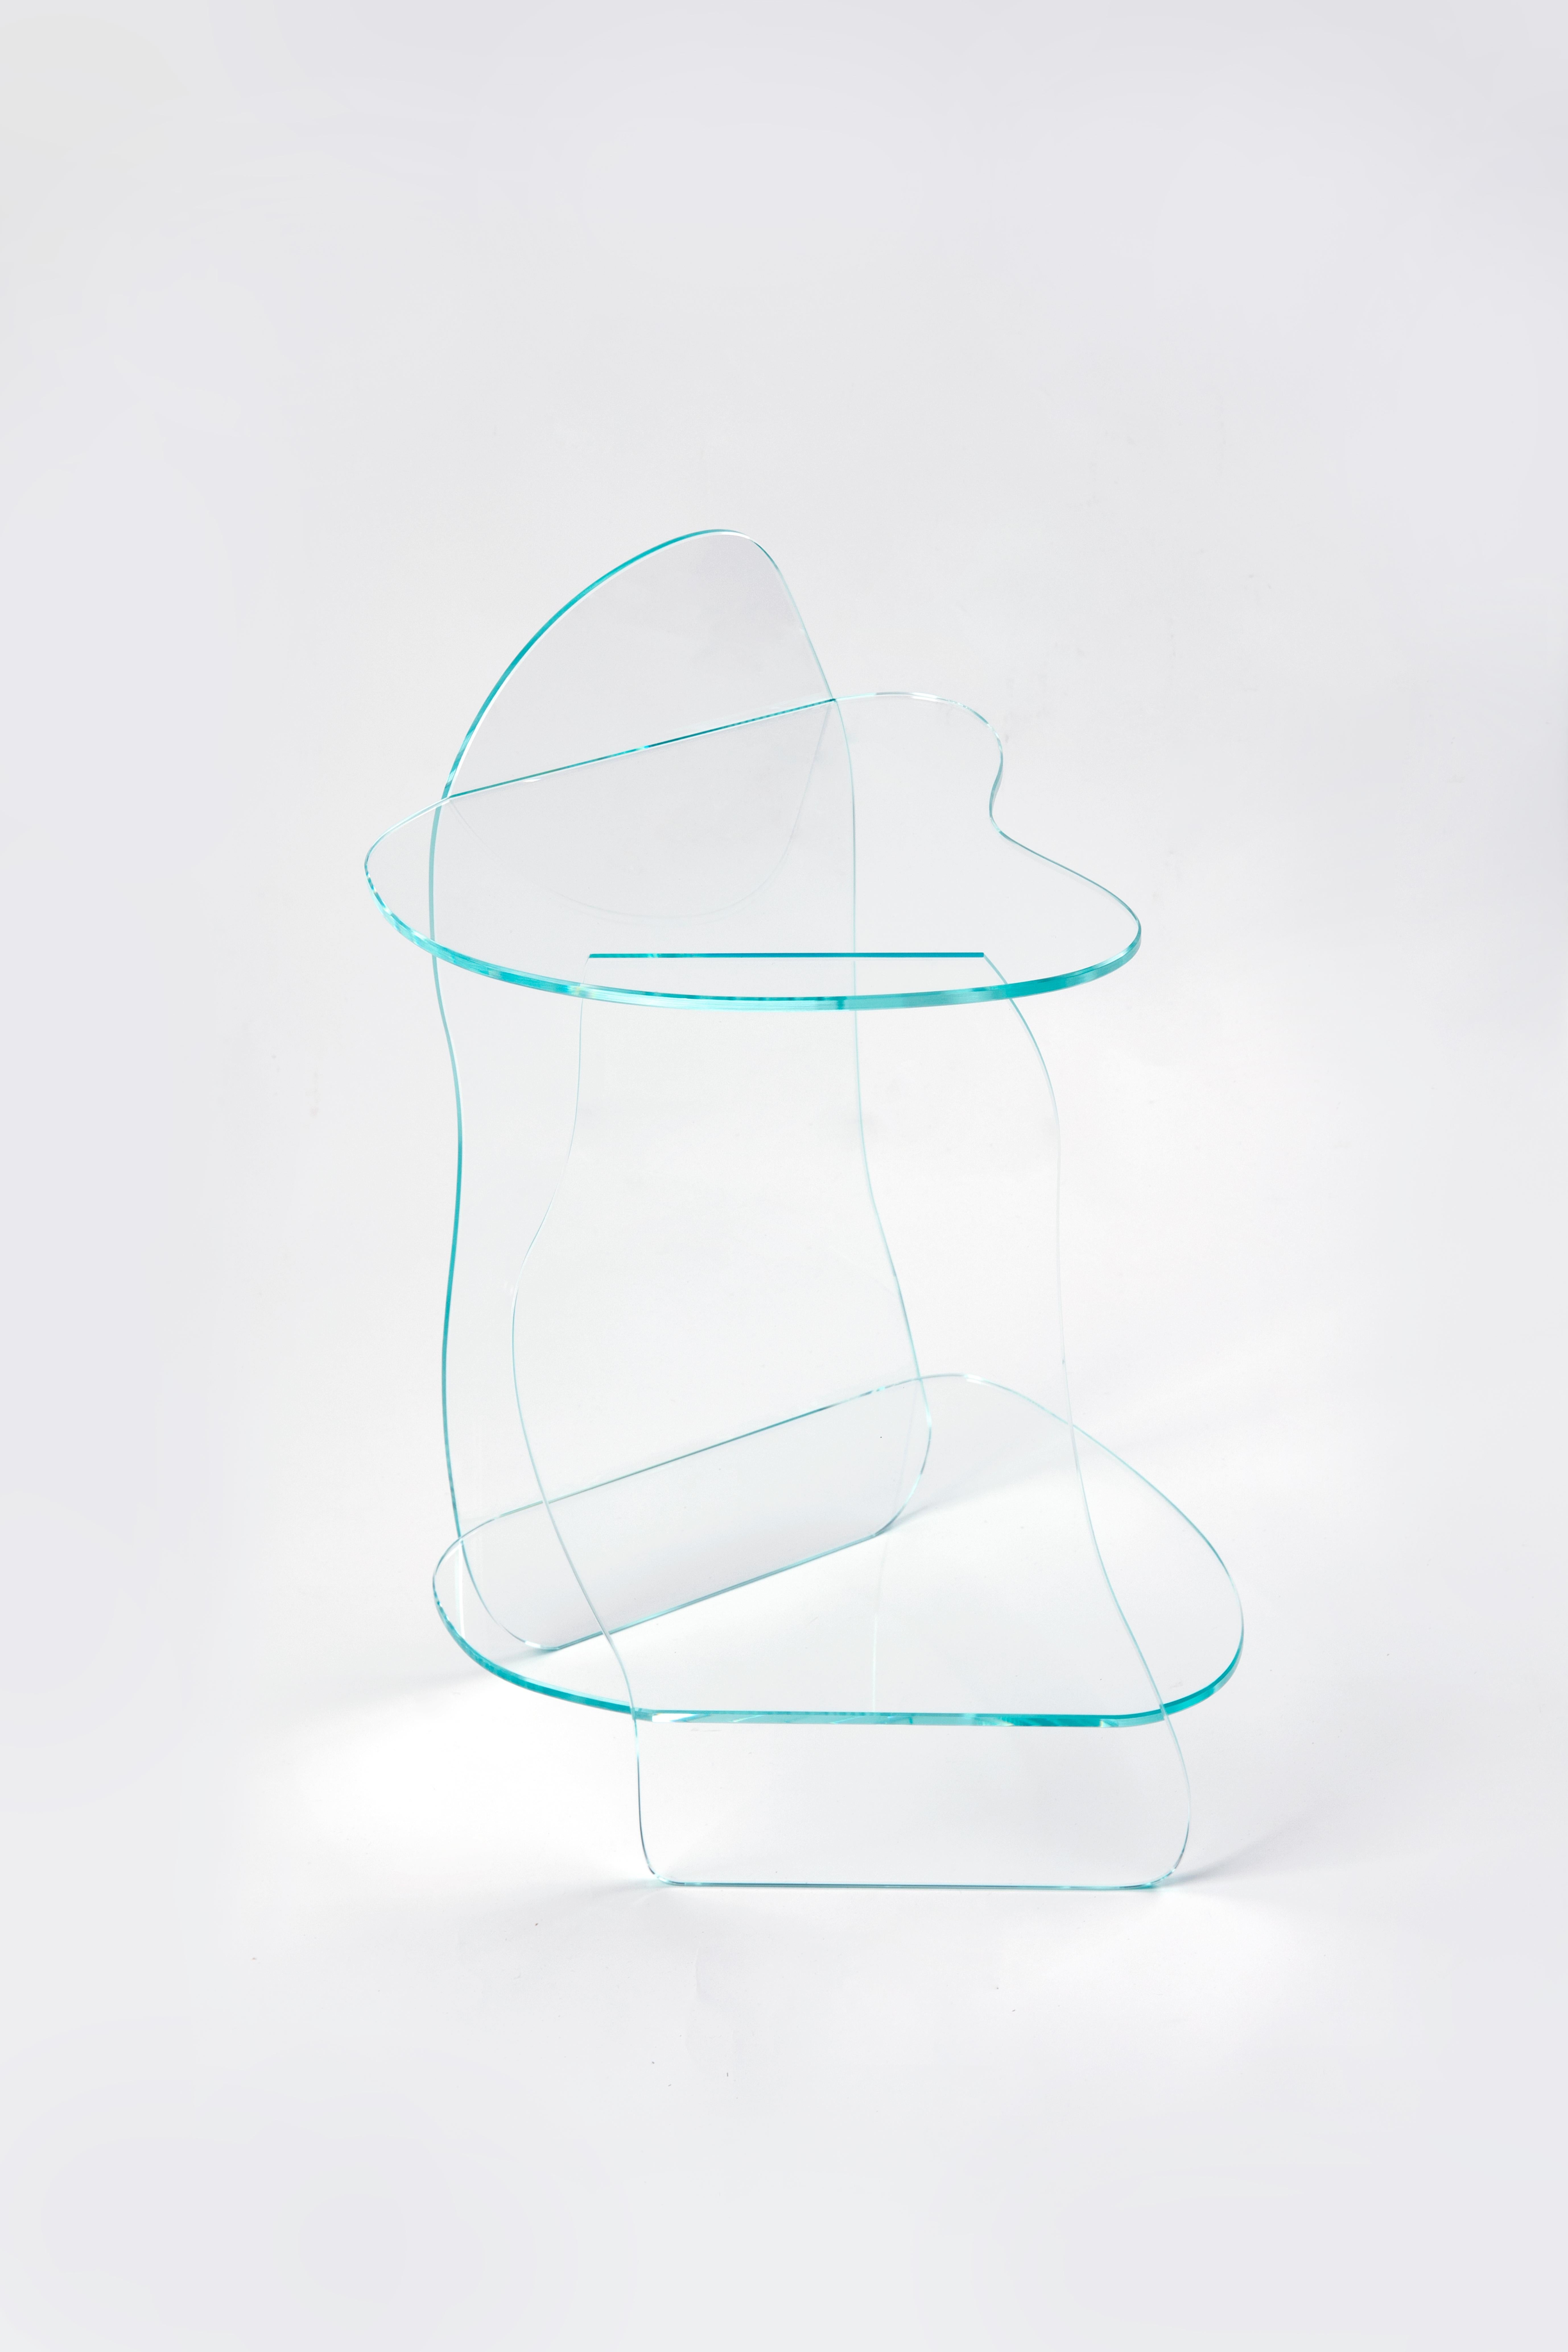 Dolmen clear glass side table sculpted by Studio-Chacha.
Dimensions: 37 x 38 x 66 cm.
Materials: Glass.

Studio-Chacha is a high-end art furniture studio founded in 2017 that creates a new aesthetic with an unfamiliar combination of familiar